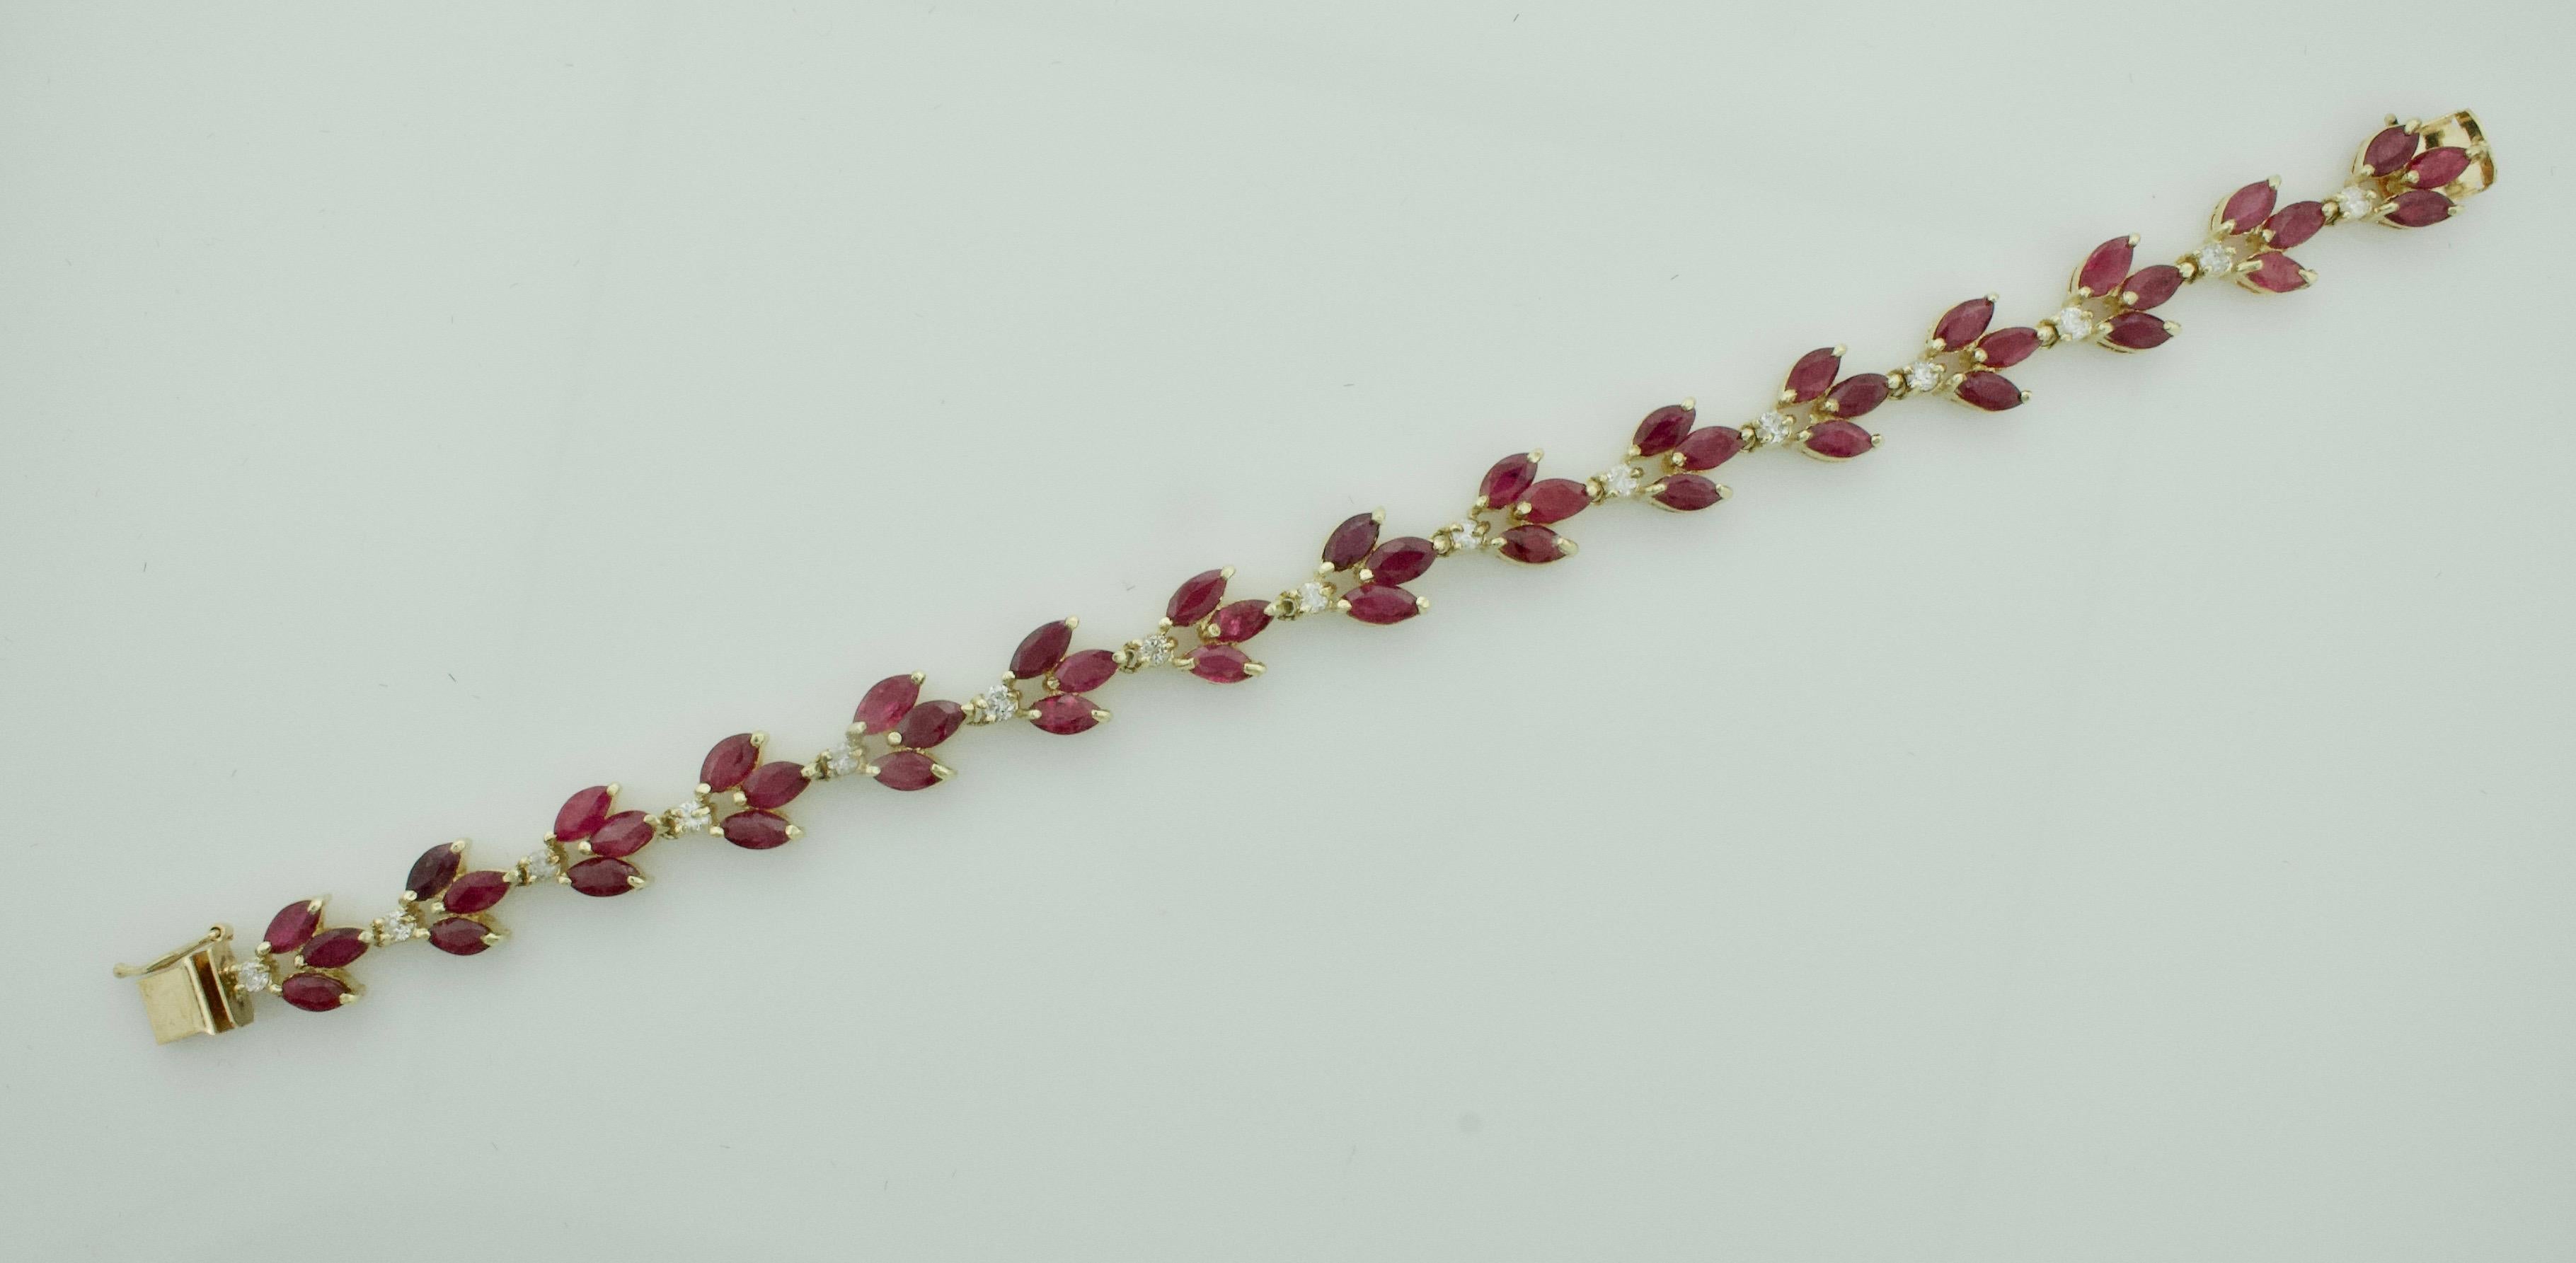 Marquise Ruby and Diamond Bracelet in Yellow Gold
Forty Five Marquise  Cut Rubies Weighing 15.00 Carats Approximately [bright with no imperfections visible to the naked eye]
Fifteen Round Brilliant Cut Diamonds Weighing .75 Carats Approximately GHI